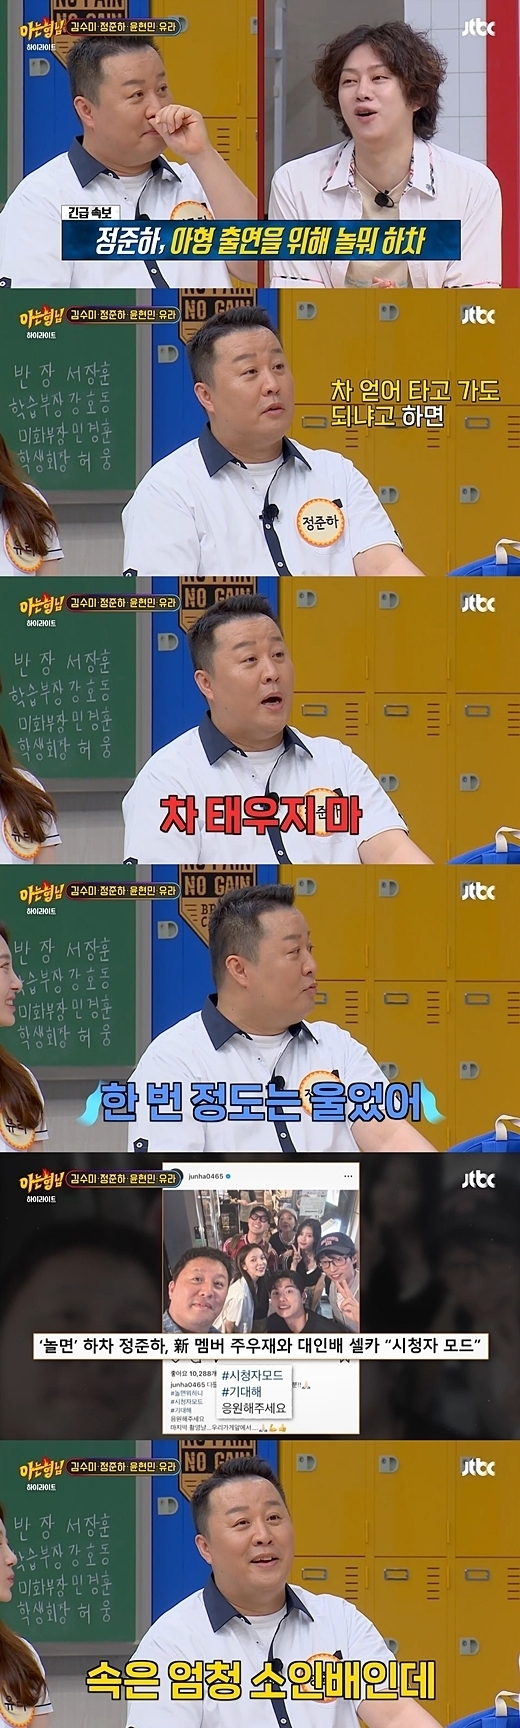 Comedian Jeong Jun-ha (52) revealed the process of MBCs Hangout with Yoo disjoint notification, confessing that he shed tears due to the disjoint.Jeong Jun-ha disjointed with comedian Shin Bong-sun (42) in Hangout with Yoo after the broadcast in June, and viewers were strongly opposed to the production teams decision to release the two.In JTBC Ai Brother broadcasted on the 16th, while Jeong Jun-ha appeared as a guest, MCs were asked, Did not you say that Hangout with Yoo recording day overlapped and could not come for a while?It is an indirect reference to Jeong Jun-has Hangout with Yoo disjoint, which he responded with a shudder, saying, I arranged it two months ago because the recording days overlapped.Then, when the MCs of Knowing Brother talked directly about Hangout with Yoo disjoint, Jeong Jun-ha said, Be careful too.One or two people, he joked, If PD suddenly gets a ride, do not burn it. In the meantime, Jeong Jun-ha recalled the process of receiving the disjoint notice, saying, I wanted to talk to you there for a while.In particular, Jeong Jun-ha said, I cried once, and I do not cry, how do I not cry? When MC Gang Ho-dong (53) asked, Did not you cry? He said frankly.In the meantime, Jeong Jun-ha posted a picture of Hangout with Yoo at the time of disjoint, and an article called an adult child Jeong Jun-ha came out.An adult child called Jeong Jun-ha.Hangout with Yoo viewers who have encountered Jeong Jun-has Confessions are getting more and more sad.It is because of the reaction that Jeong Jun-ha, Shin Bong-sun disjoint was a difficult decision in public opinion.At that time, Hangout with Yoo was criticized for its directing and planning ability, and it was experiencing an upsurge in ratings. It was followed by a reaction that Jeong Jun-ha and Shin Bong-sun, who played the central role of the program, did not agree on why they should disjoint.Shin Bong-sun has also revealed Hangout with Yoo disjoint heart elsewhere.Shin Bong-sun appeared on the YouTube channel Mi-Sun Impossible in July. While talking to Gag Woman Park Mi-sun (56), she talked about the moments she had disjointed in KBS 2TV Happy Together I went over, and Park Mi-sun said, Is not it right with you?I joked, This is not right, is it? Park Mi-sun said, Its always best to end up with entertainment, because its not.Shin Bong-sun also said, There is a part of me that is uncomfortable. In the old days, I could not even tease it.But now I understand it, and sometimes I feel so good that I can say I feel bad.When Park Mi-sun asked me if I was sad, Shin Bong-sun said, I just understand each other at the end of the conversation, I feel uncomfortable with each other. I do not hate the production team, I understand, but I ignore my feelings Because I am precious, he said.Jeong Jun-ha and Shin Bong-suns disjoint were announced together with Hangout with Yoo announcing the reorganization in June.At the time, the production crew said, Jeong Jun-ha and Shin Bong-sun, who have been together for the past two years,After the broadcast on June 10th, I left Hangout with Yoo. Thank you again to Jeong Jun-ha and Shin Bong-sun for giving me a bright smile with all my heart. Hangout with Yoo disjointed Jeong Jun-ha and Shin Bong-sun and resumed with a new member, but since then it has been hovering below the 5% audience rating (Nielsen Korea nationwide).On August 12, the number of broadcasts dropped to 2.9 percent. The most recent broadcast on the 16th was 4.0 percent.